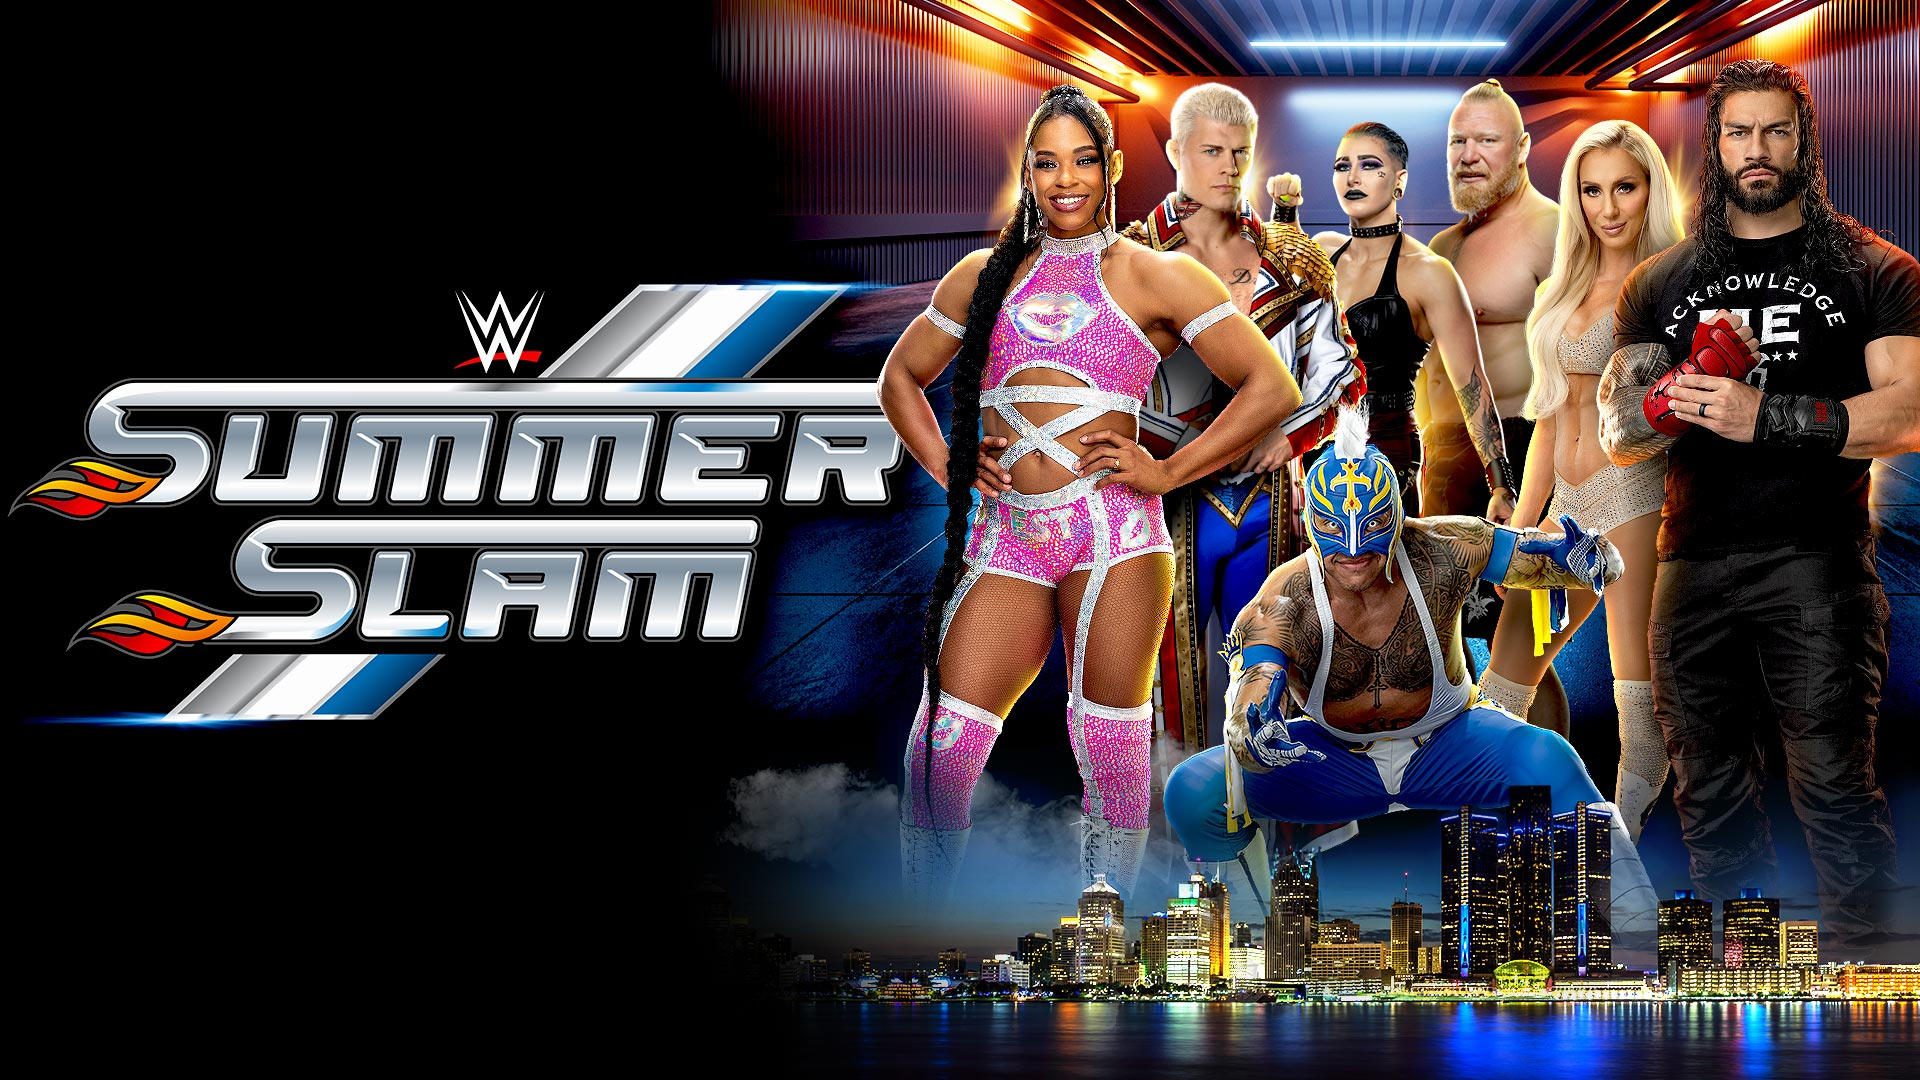 Battle Royal Added To WWE SummerSlam On August 5th